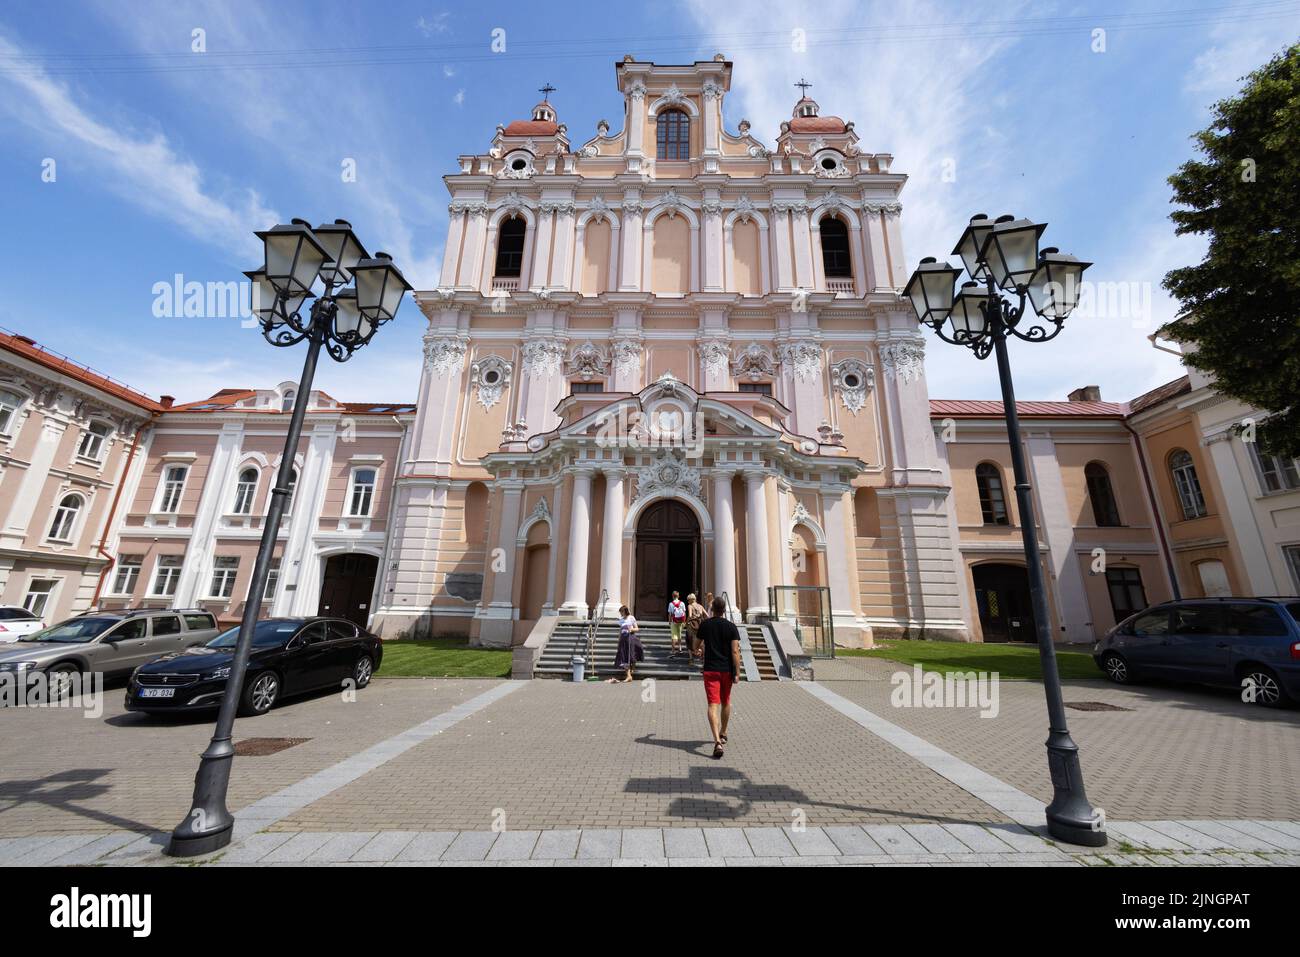 People outside the Church of St. Casimir exterior, a baroque 17th century catholic church, Vilnius old town, Vilnius, Lithuania Europe Stock Photo